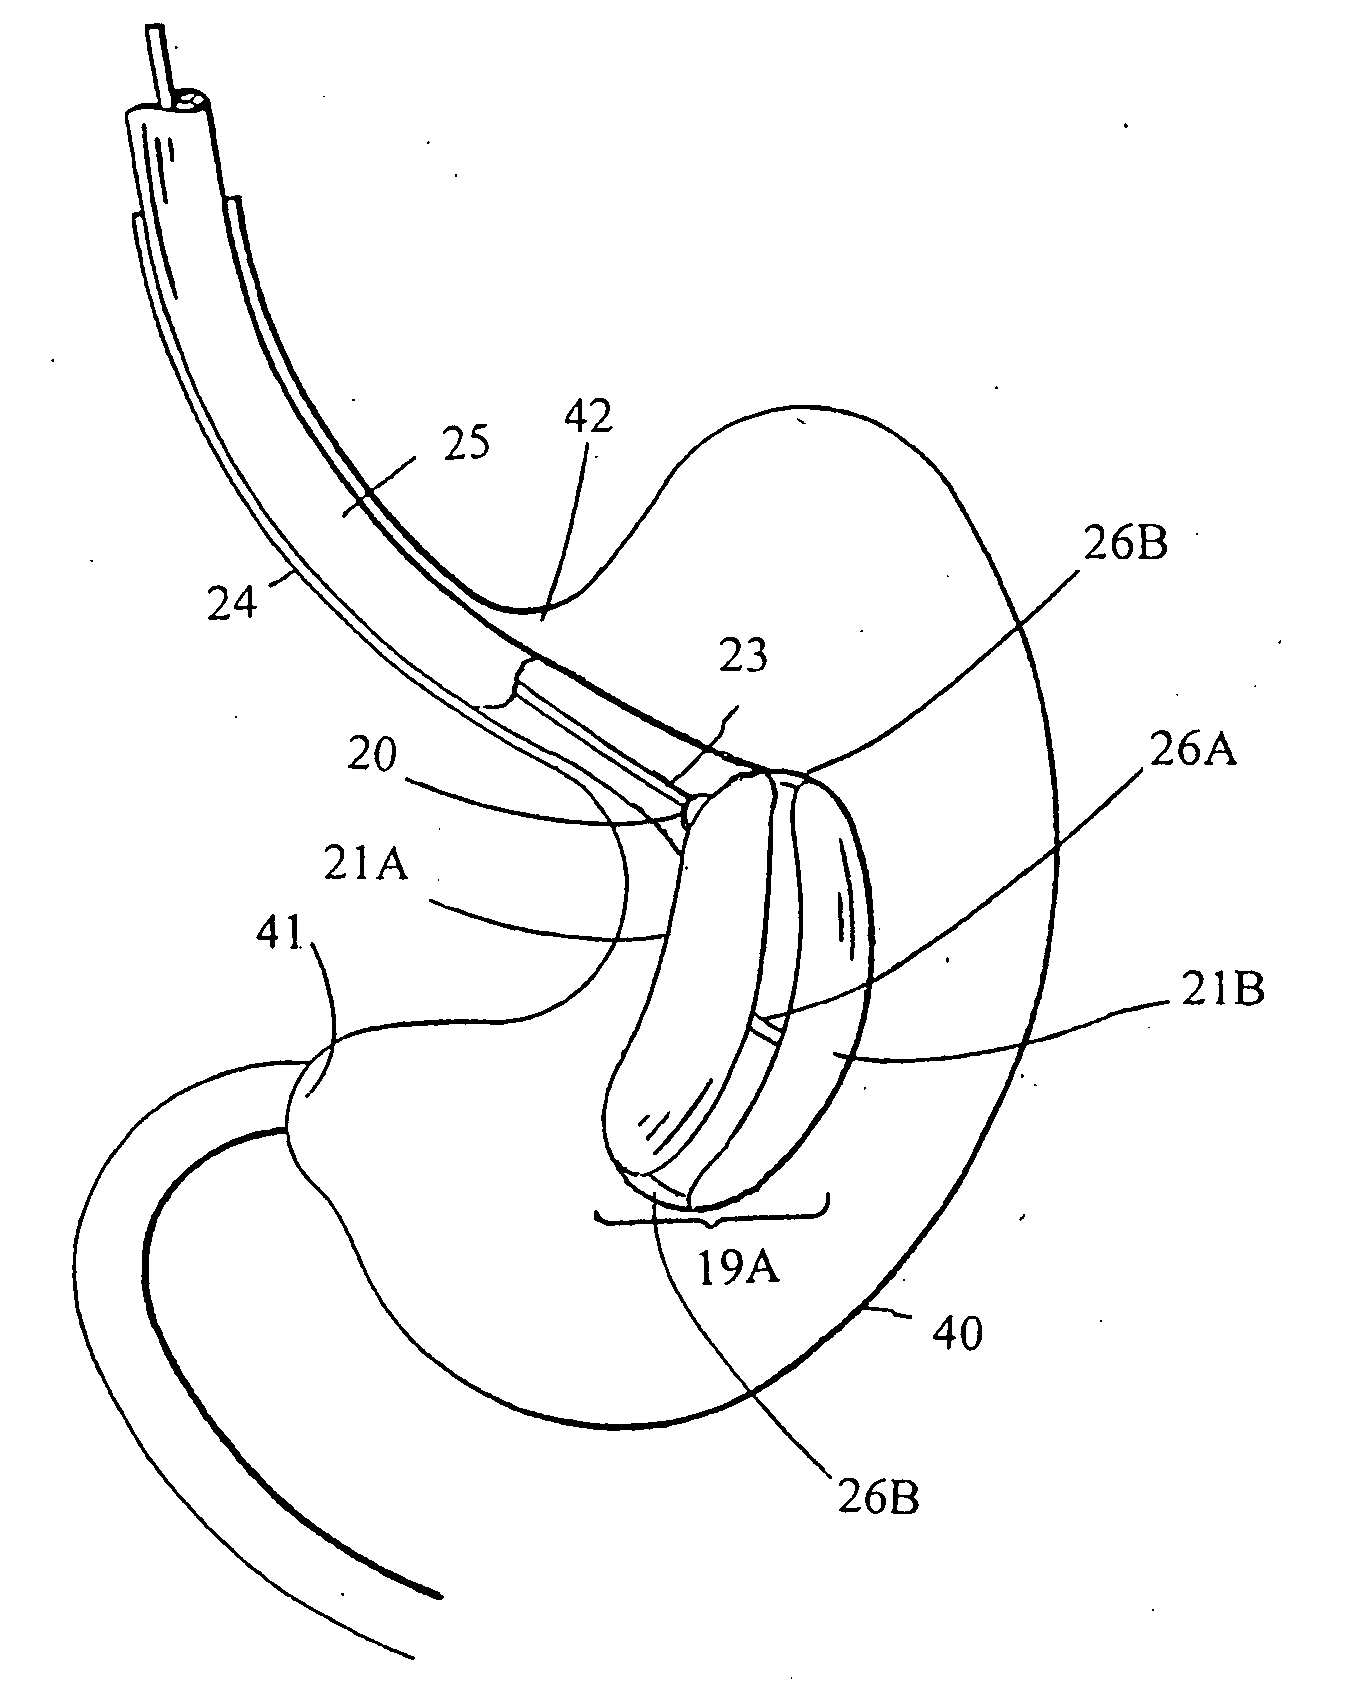 Intragastric space filler and methods of manufacture